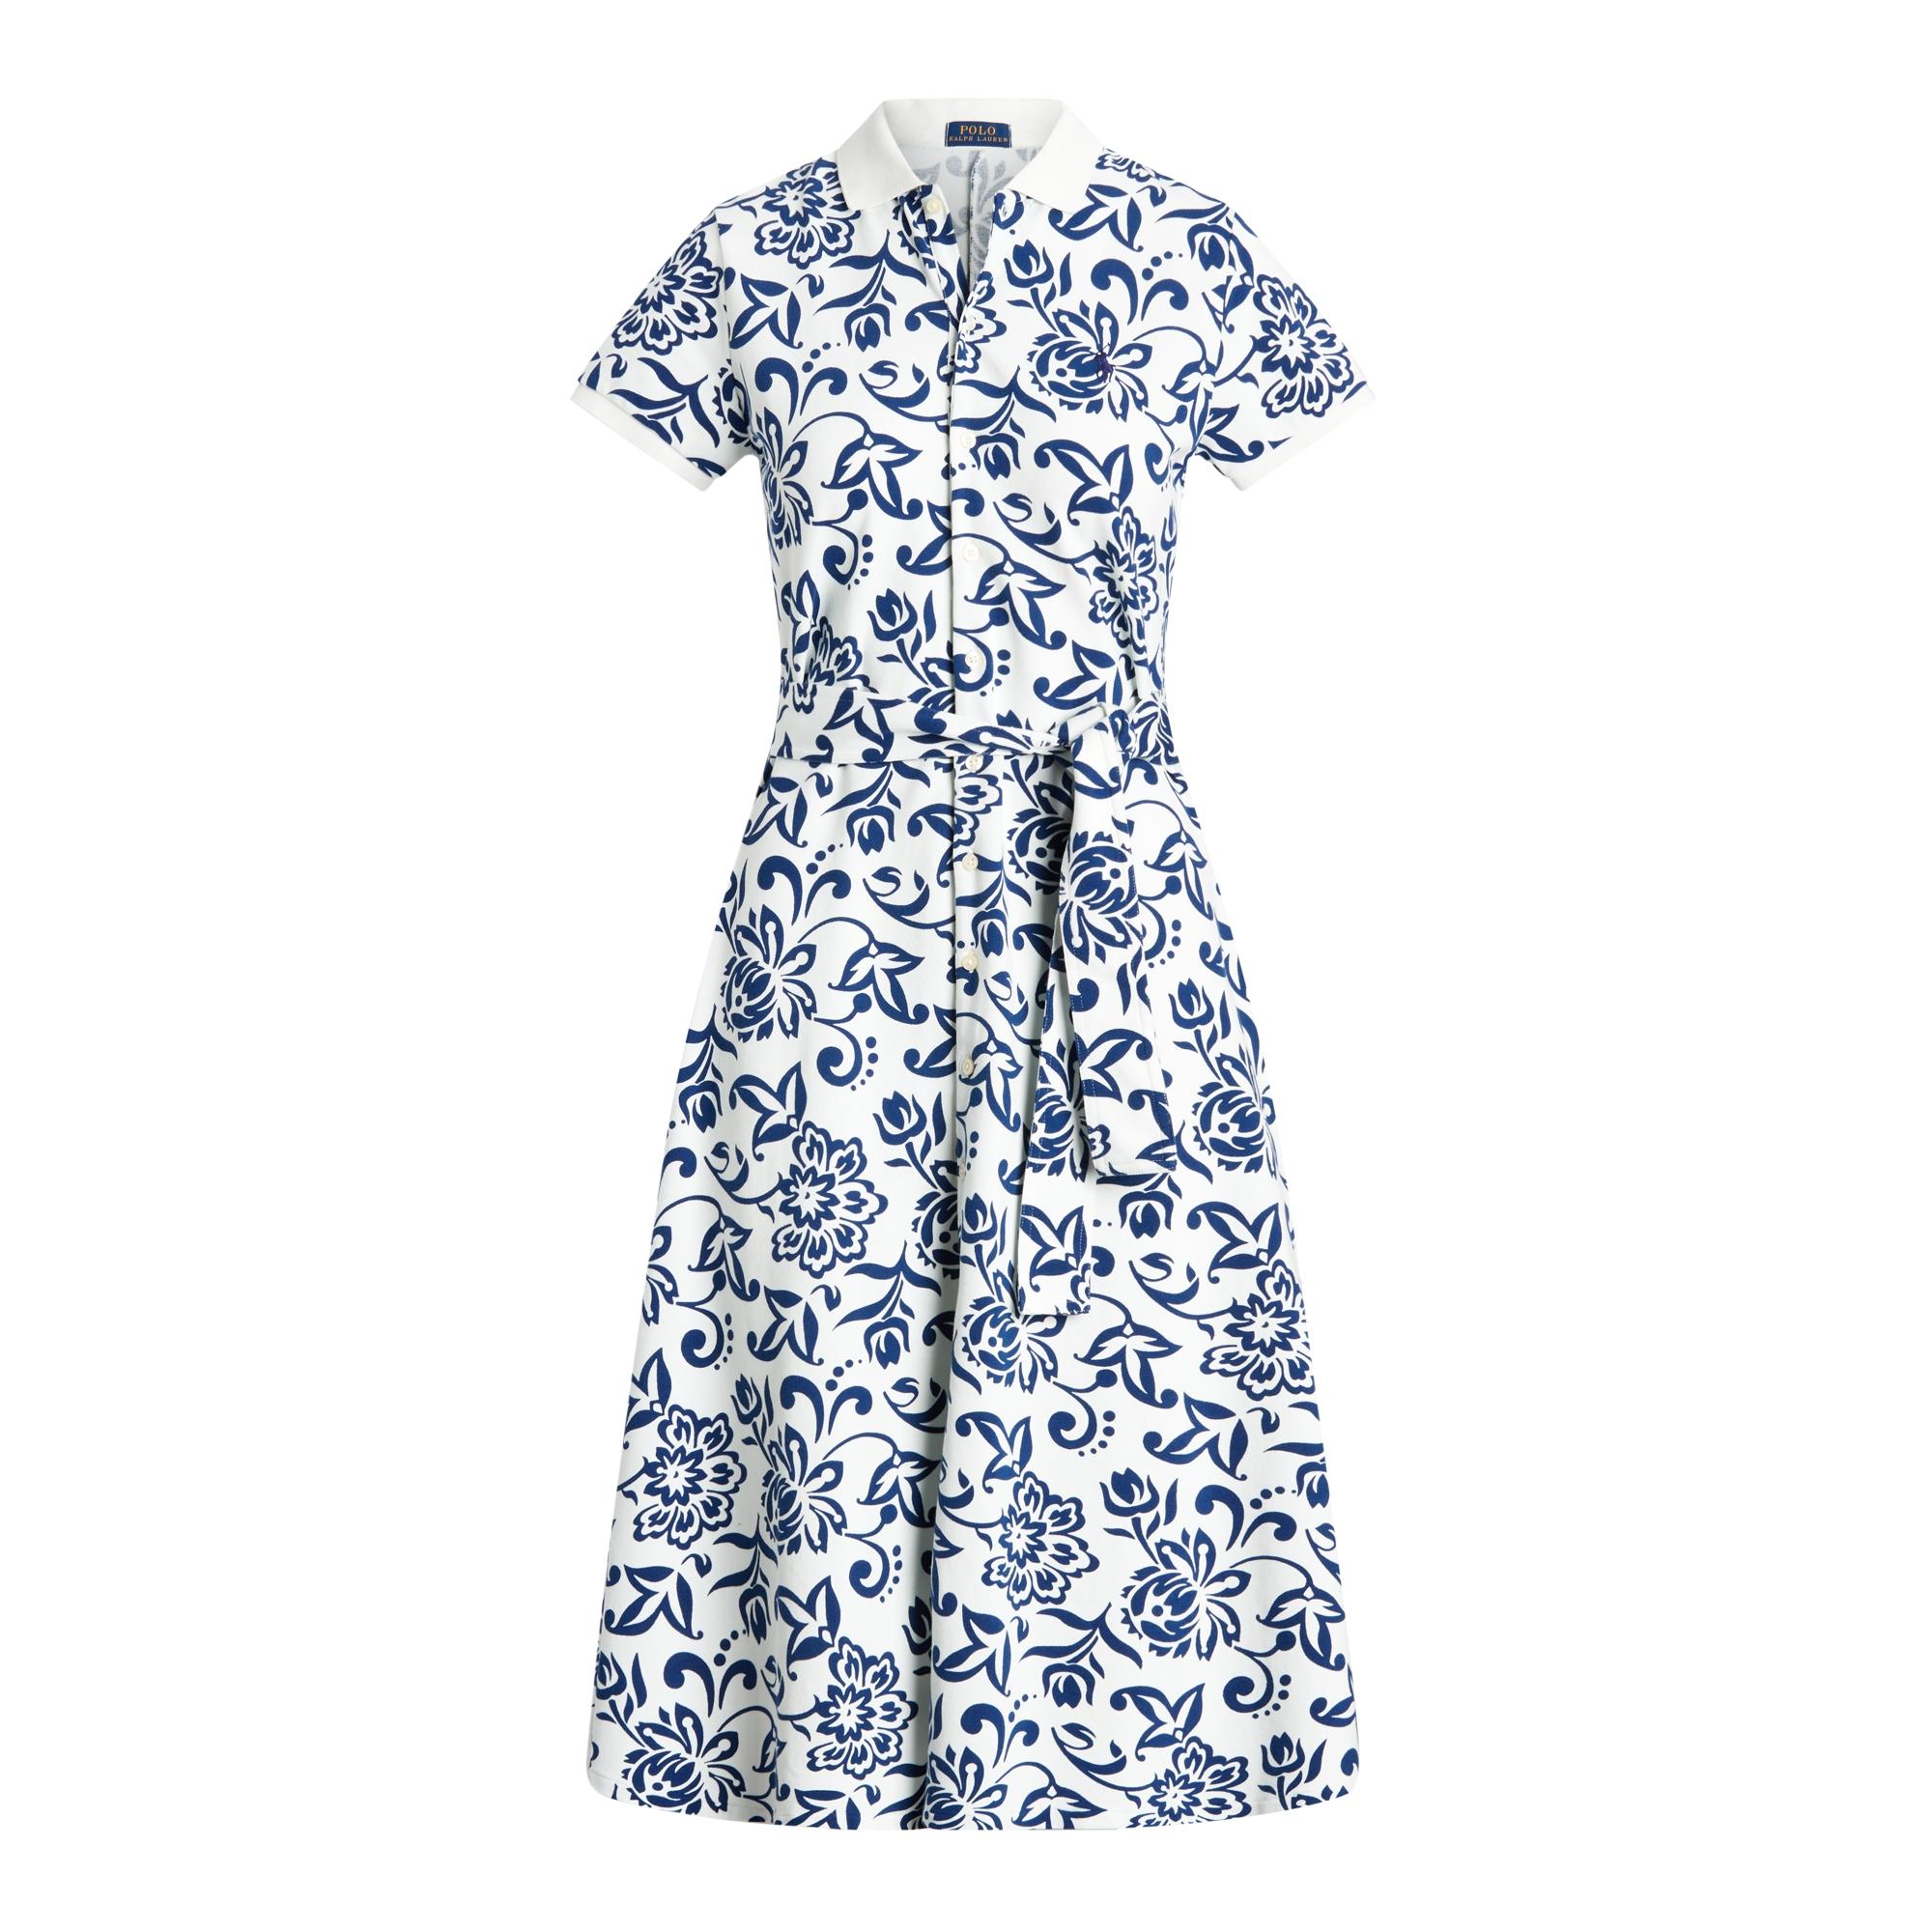 Polo Ralph Lauren Floral Belted Cotton Dress in Blue - Lyst